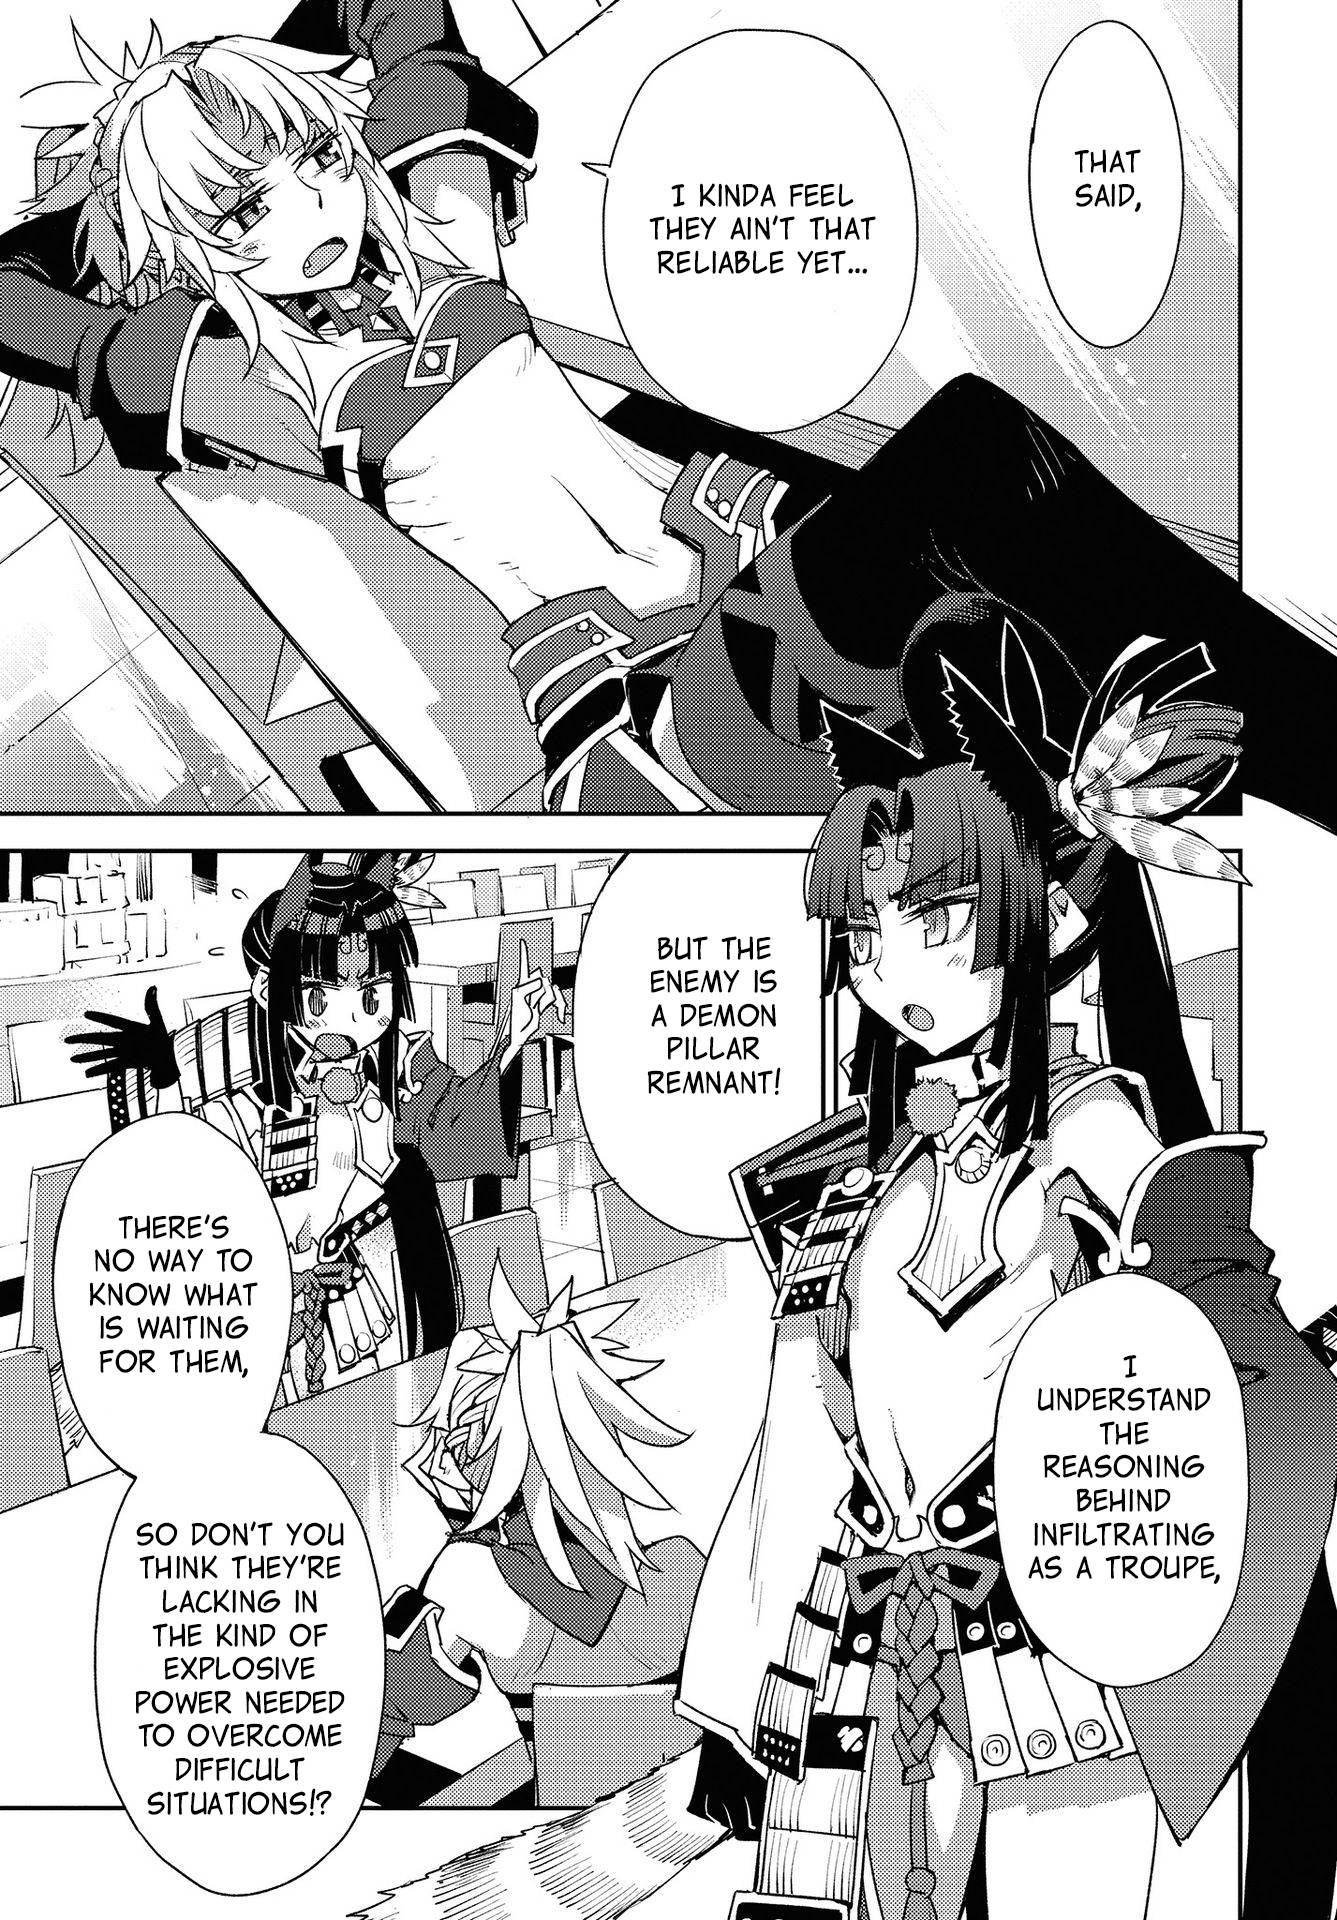 Fate/Grand Order: Epic of Remnant - Subspecies Singularity IV: Taboo Advent Salem: Salem of Heresy - chapter 17 - #4